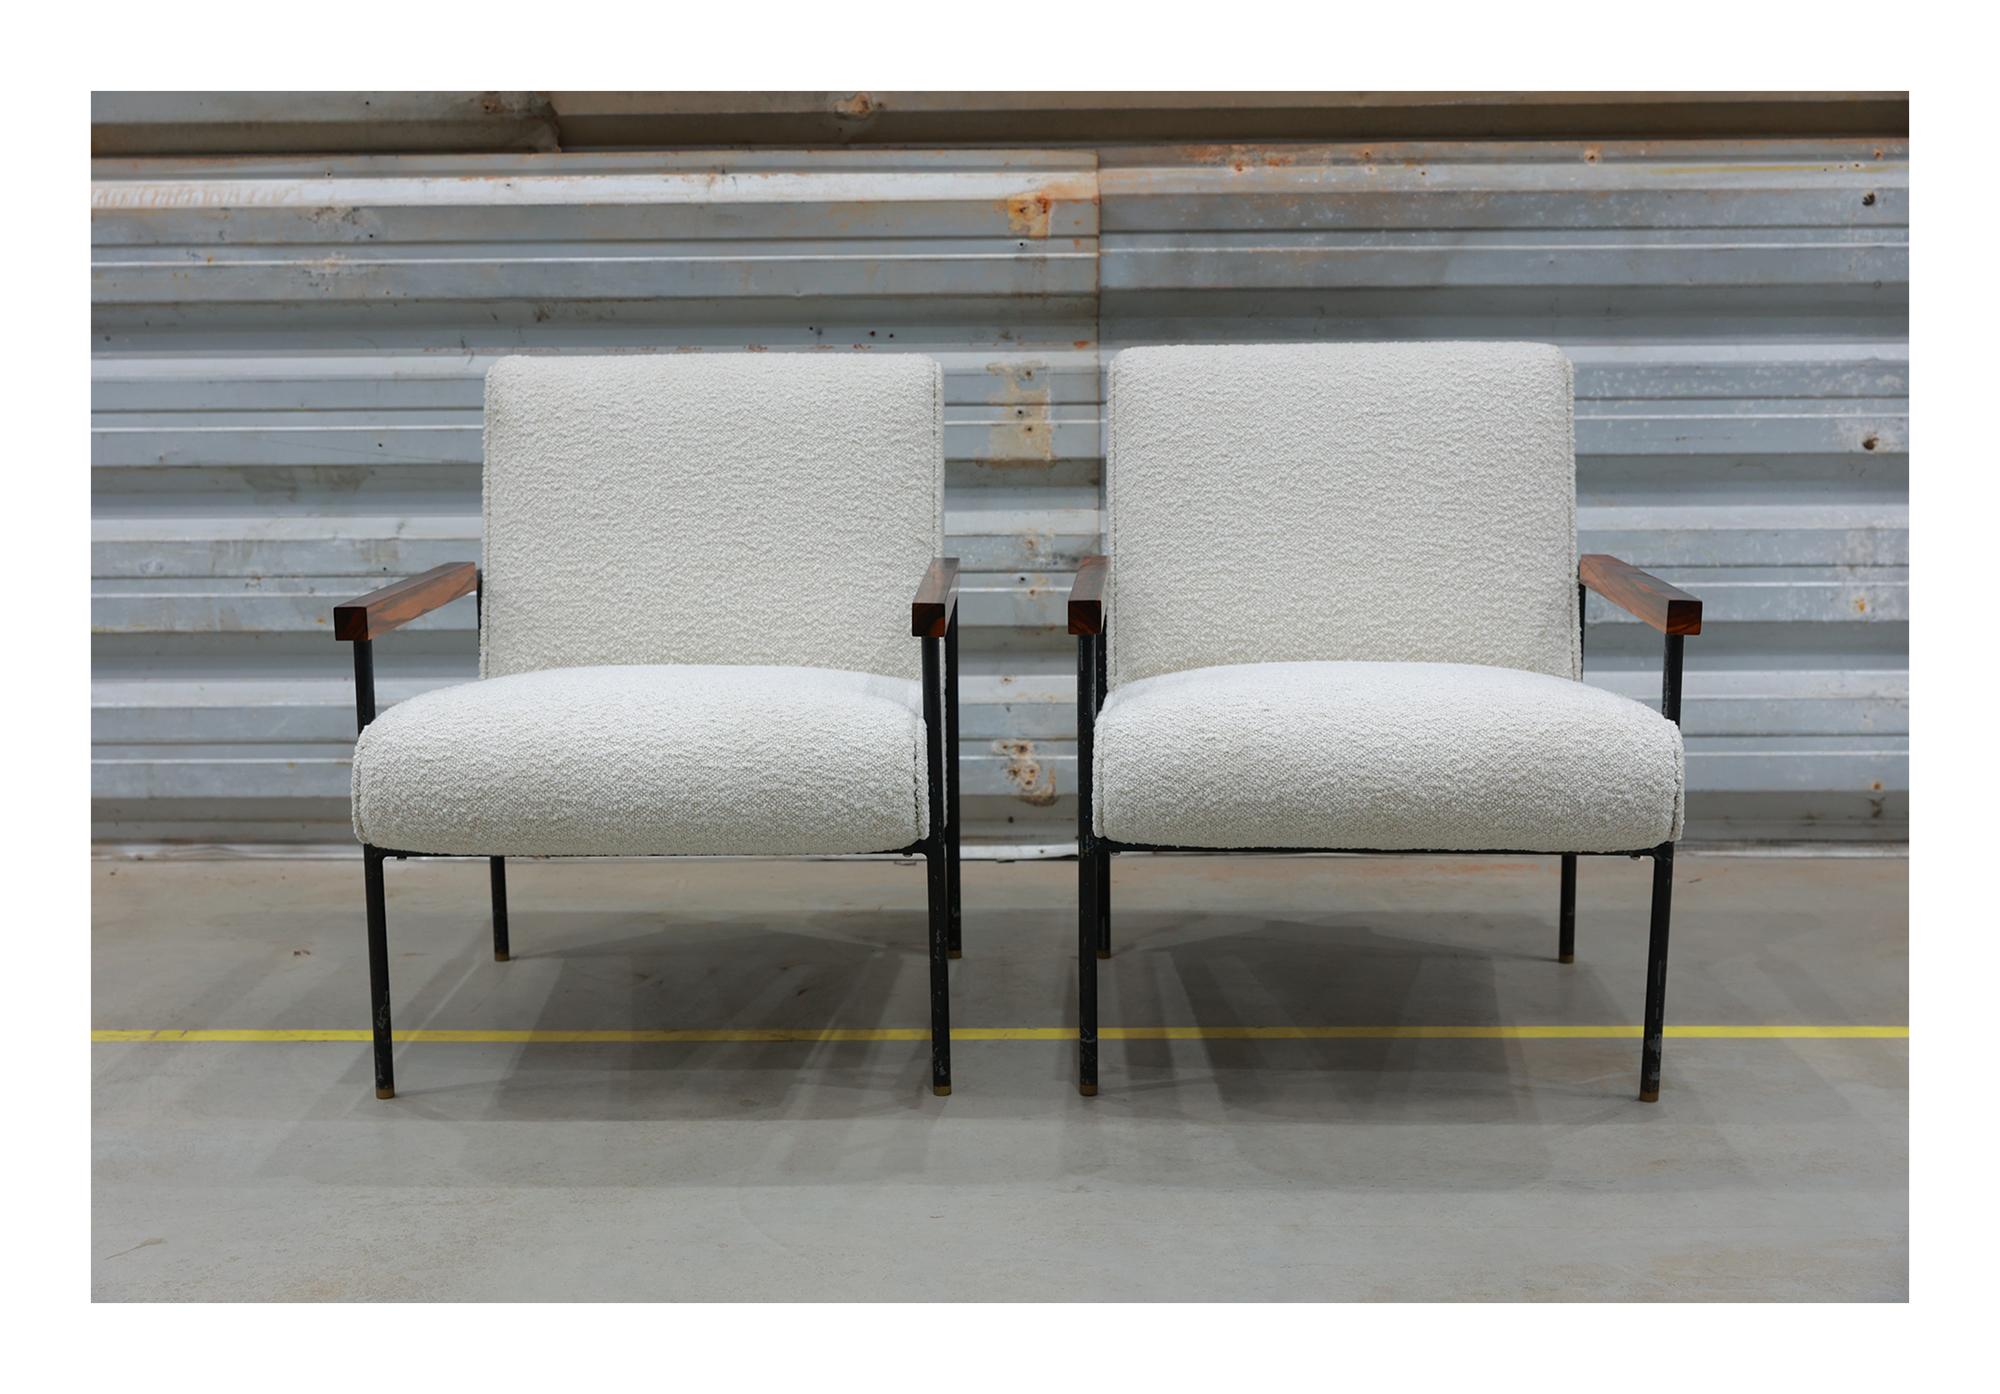 Available today, these Brazilian Modern armchairs designed by Geraldo de Barros are nothing less than gorgeous. 

These timeless armchairs were designed by Geraldo de Barros for his own company Unilabor in the 1950s. It is one of Barros’ most iconic